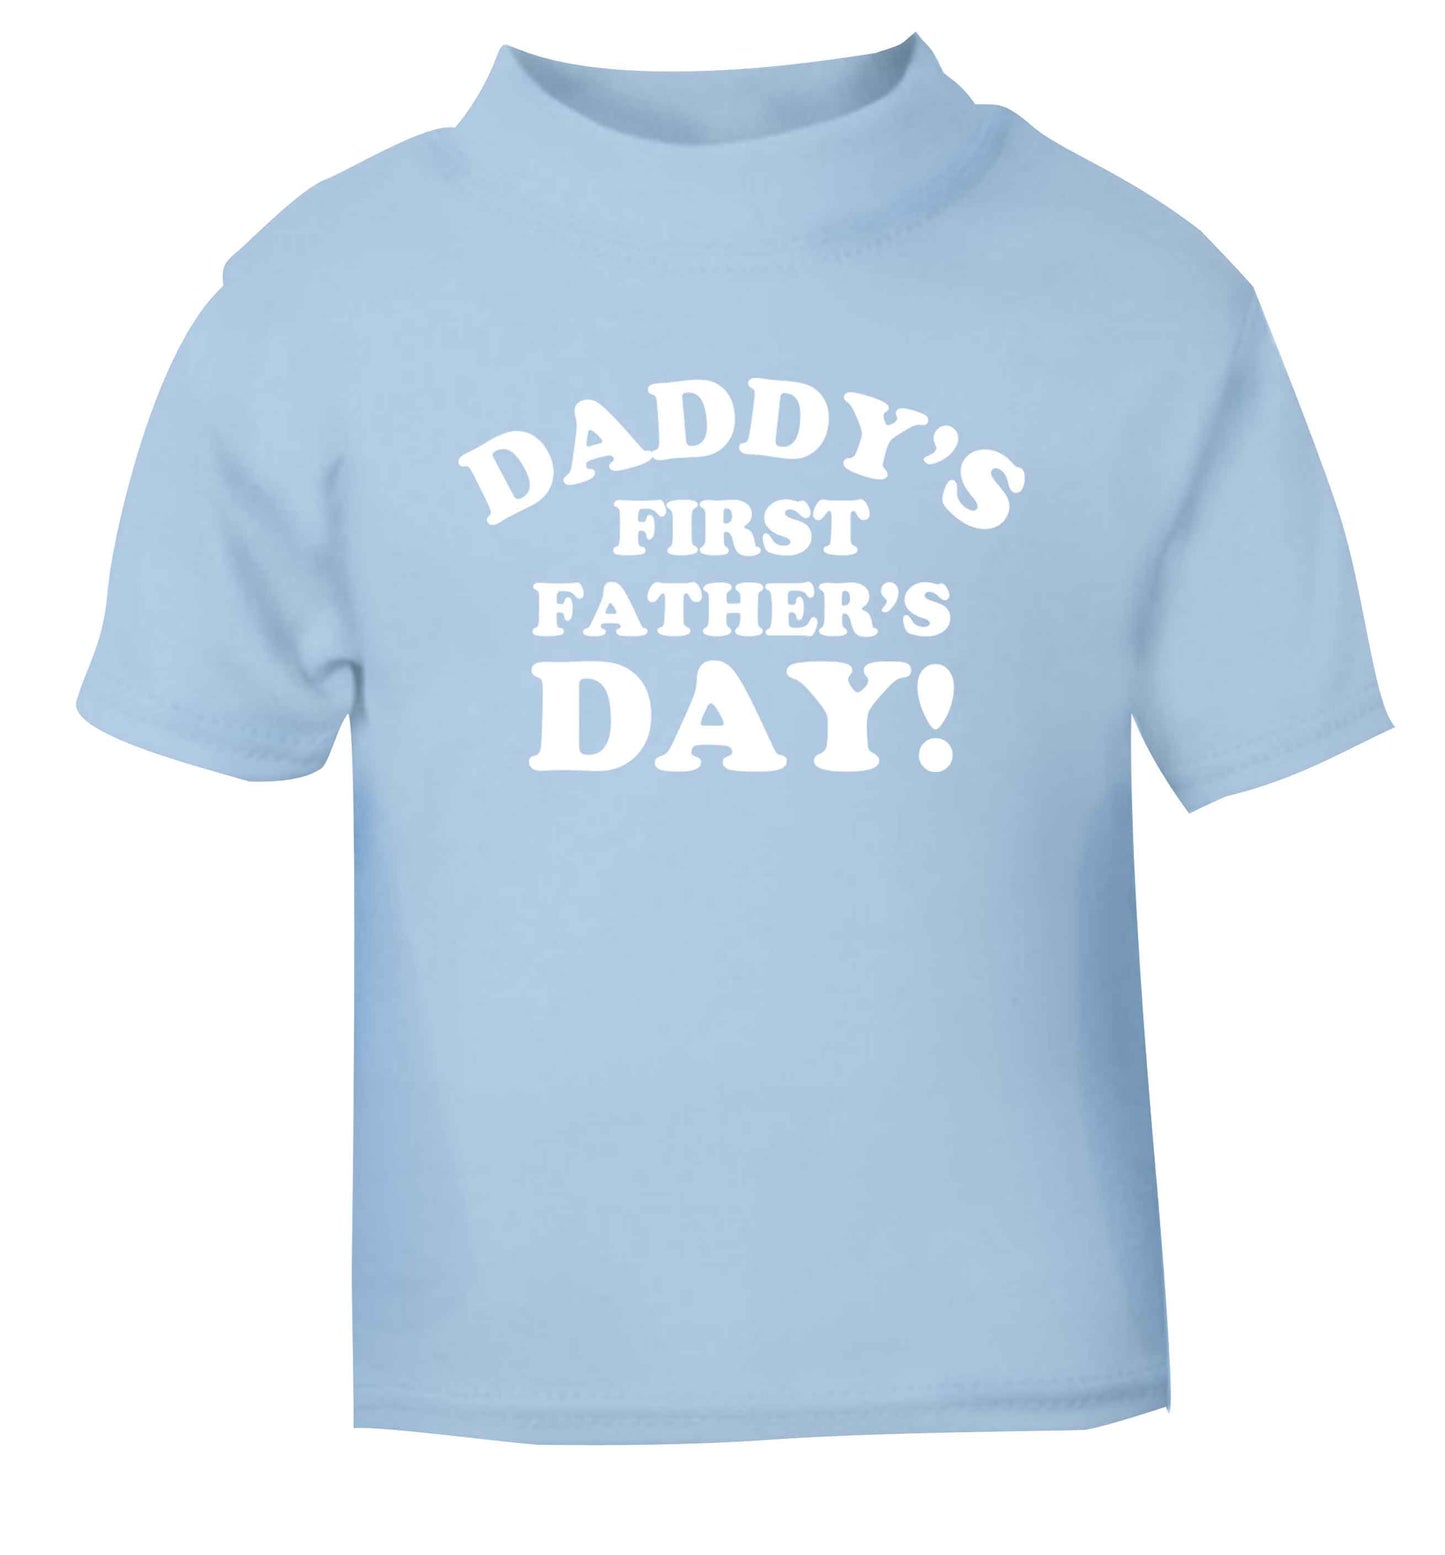 Daddy's first father's day light blue baby toddler Tshirt 2 Years